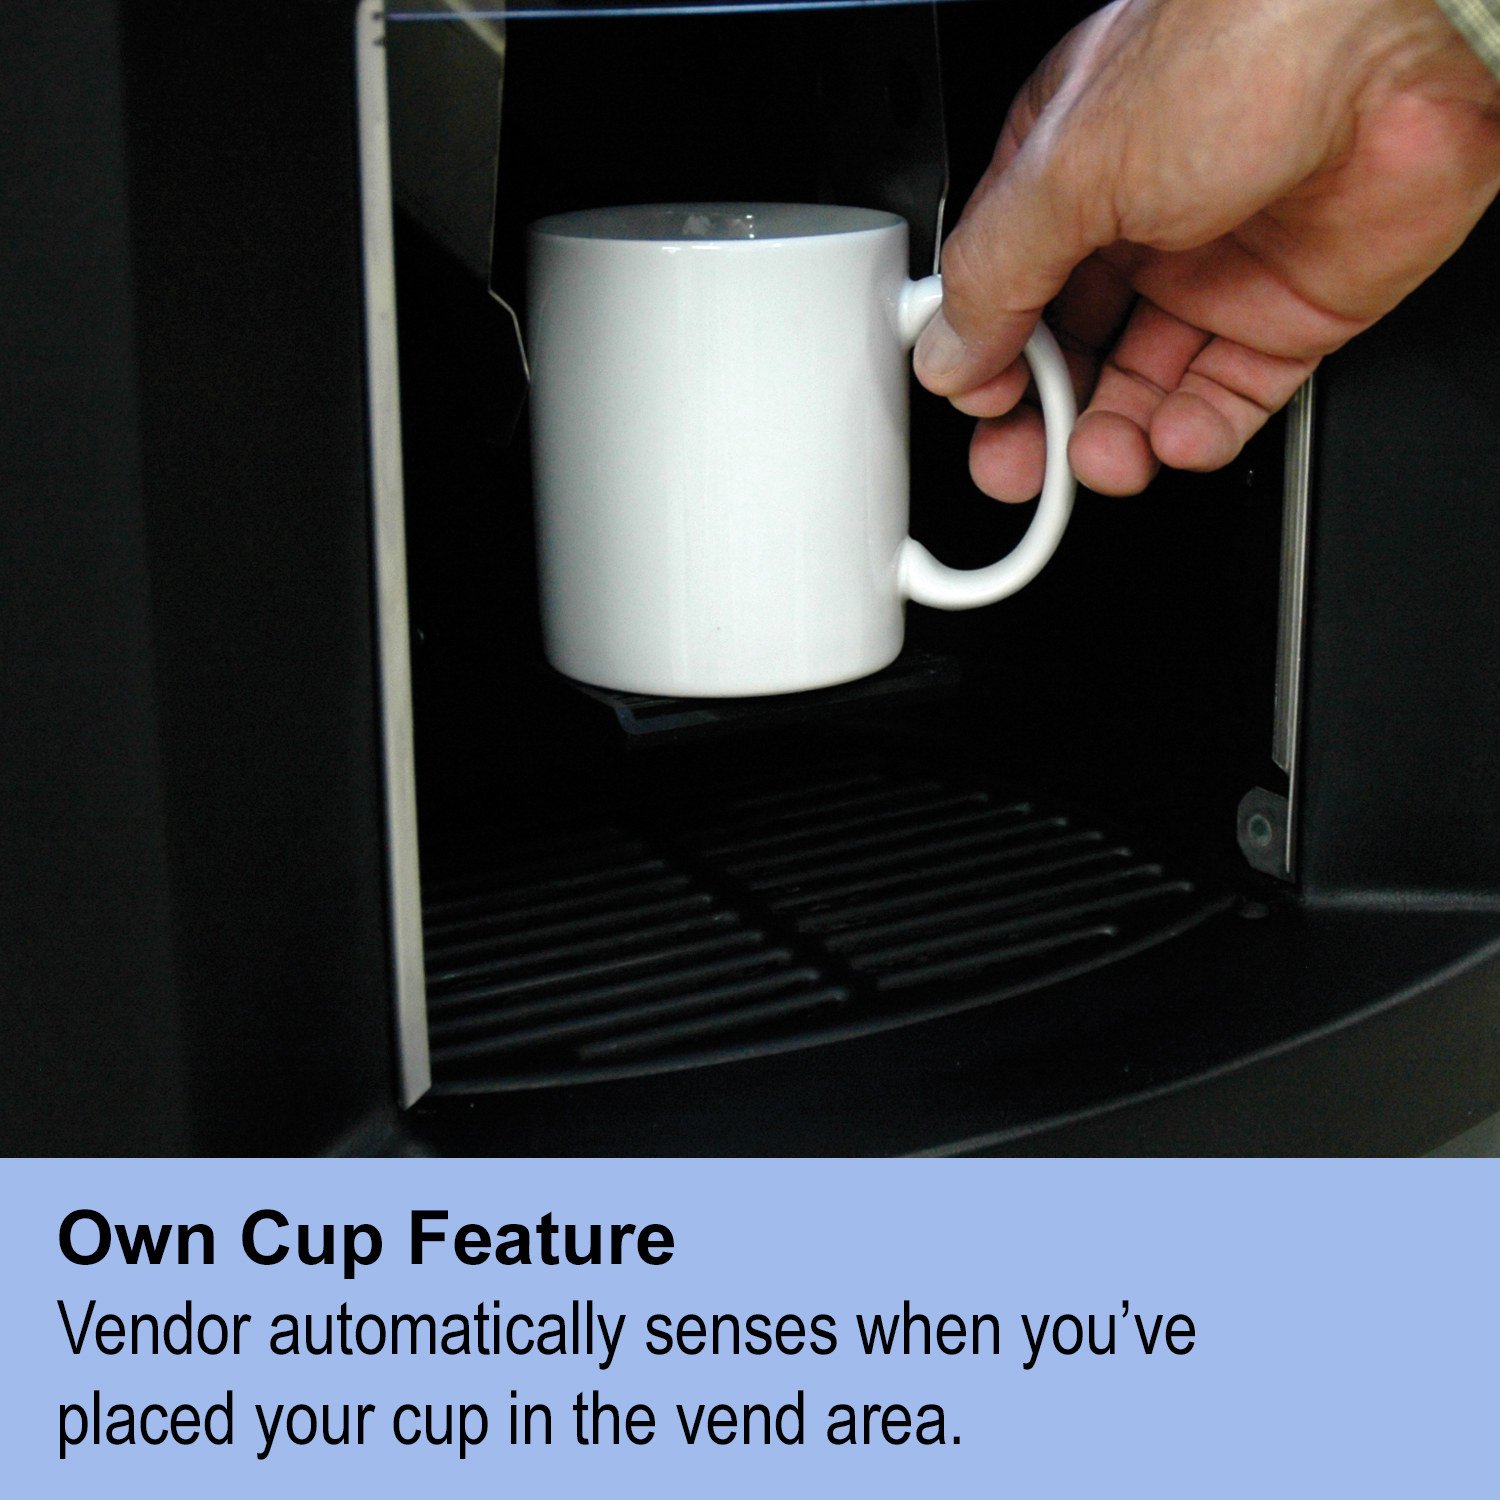 The Coffee Hot Beverage Vending Machine from Selectivend has an own cup feature for users.